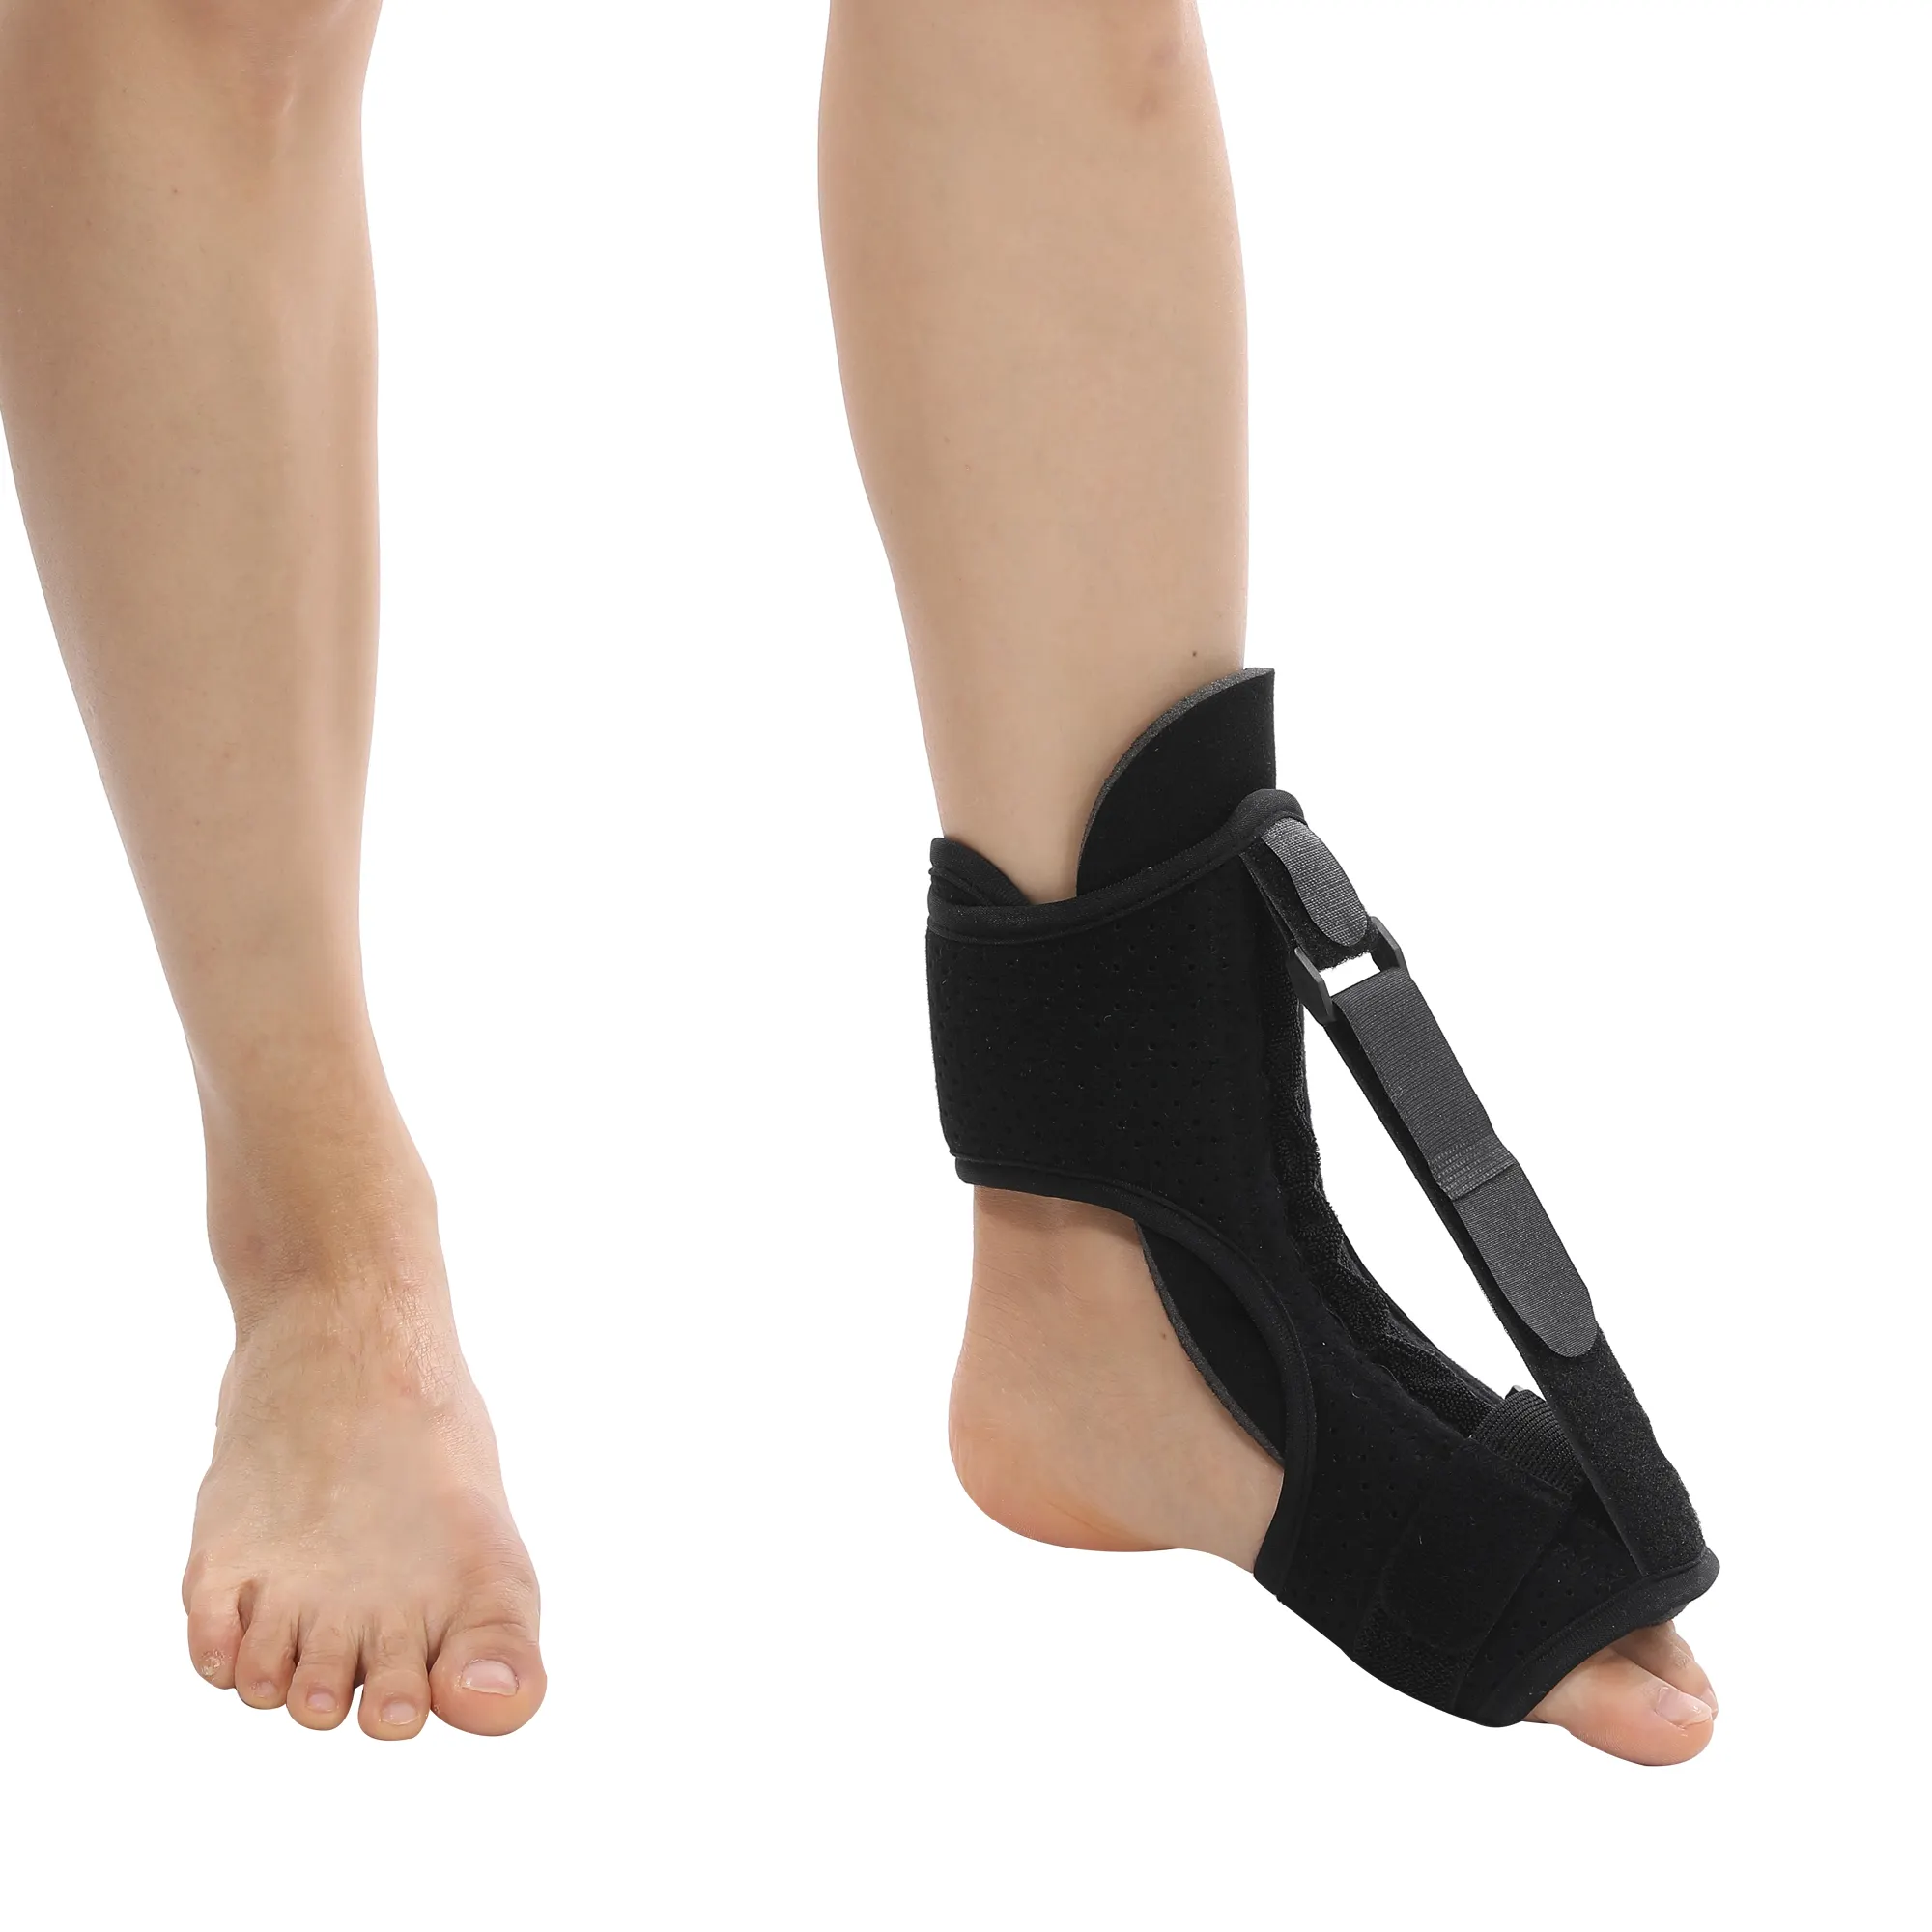 Ajustable Plantar Fasciitis Night Splint Ankle Brace for Foot Orthosis Foot Pain Relief with CE